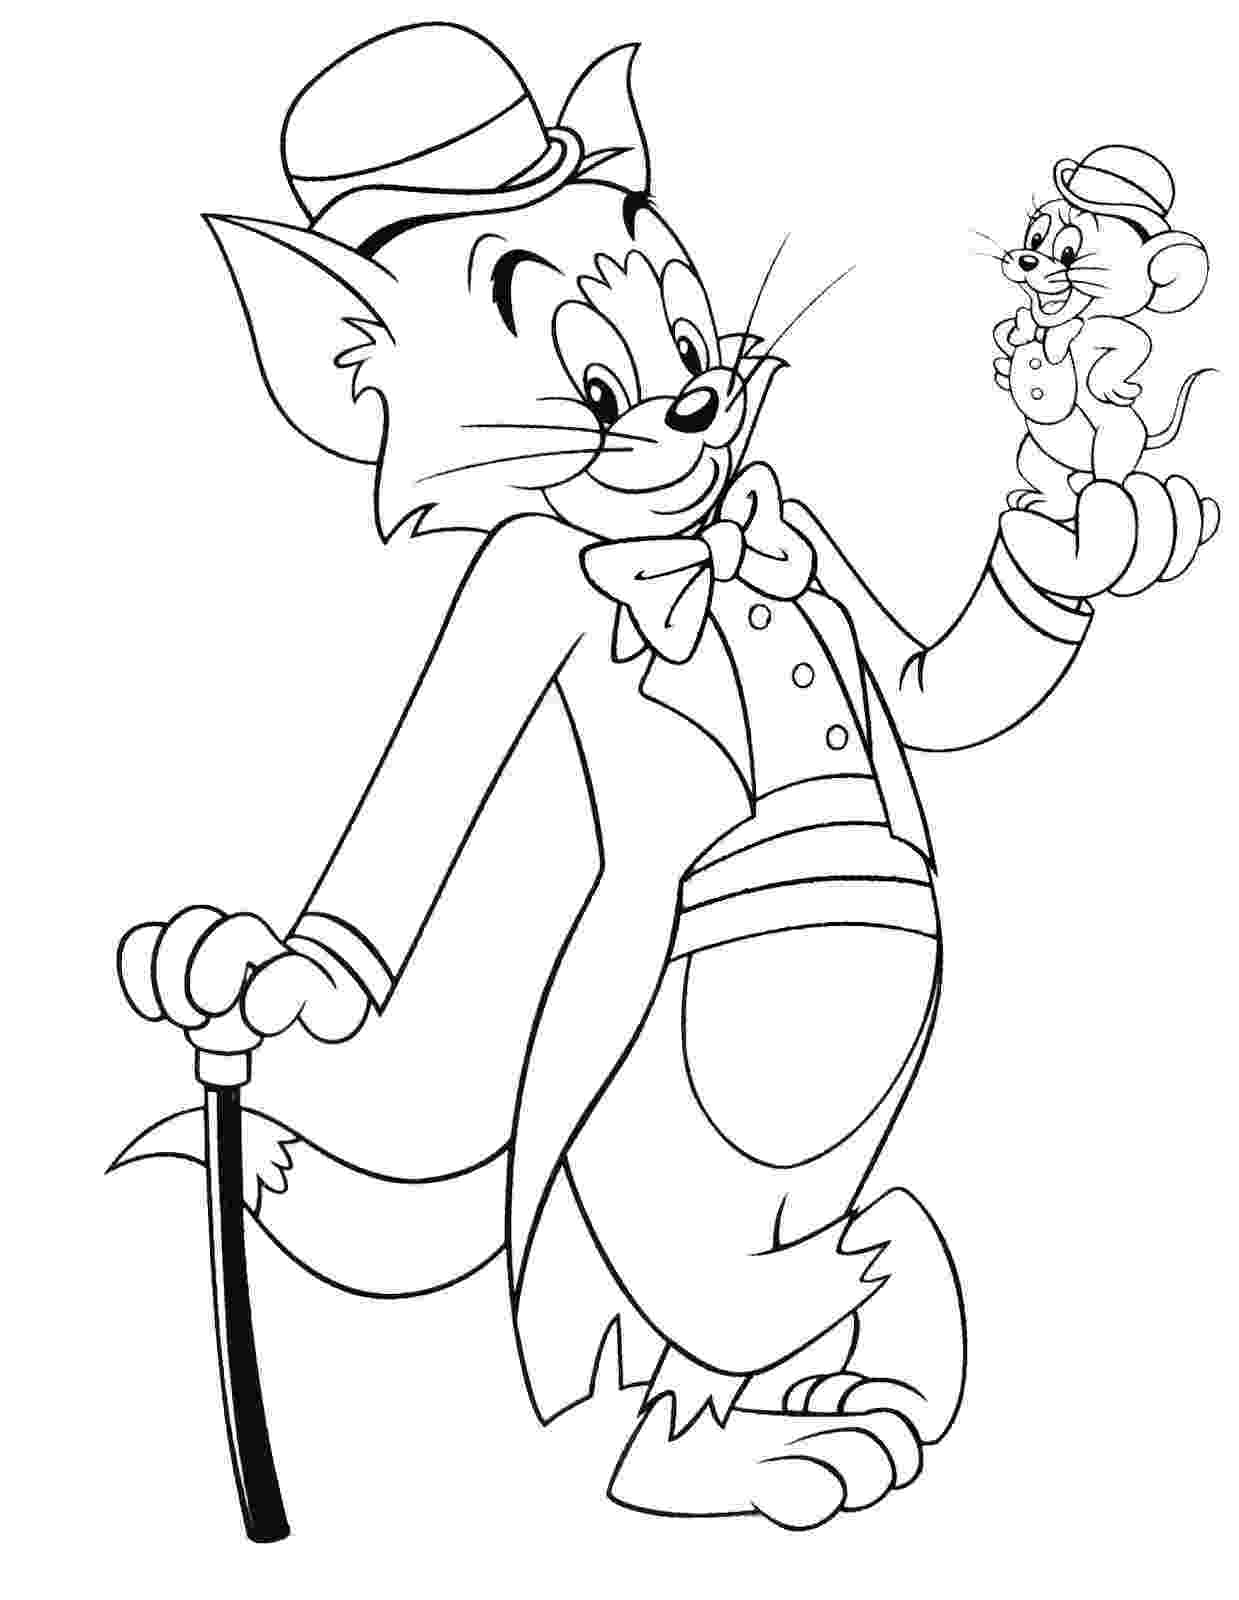 tom and jerry coloring pages online tom and jerry cartoon quot tom quot character coloring pages coloring online tom and pages jerry 